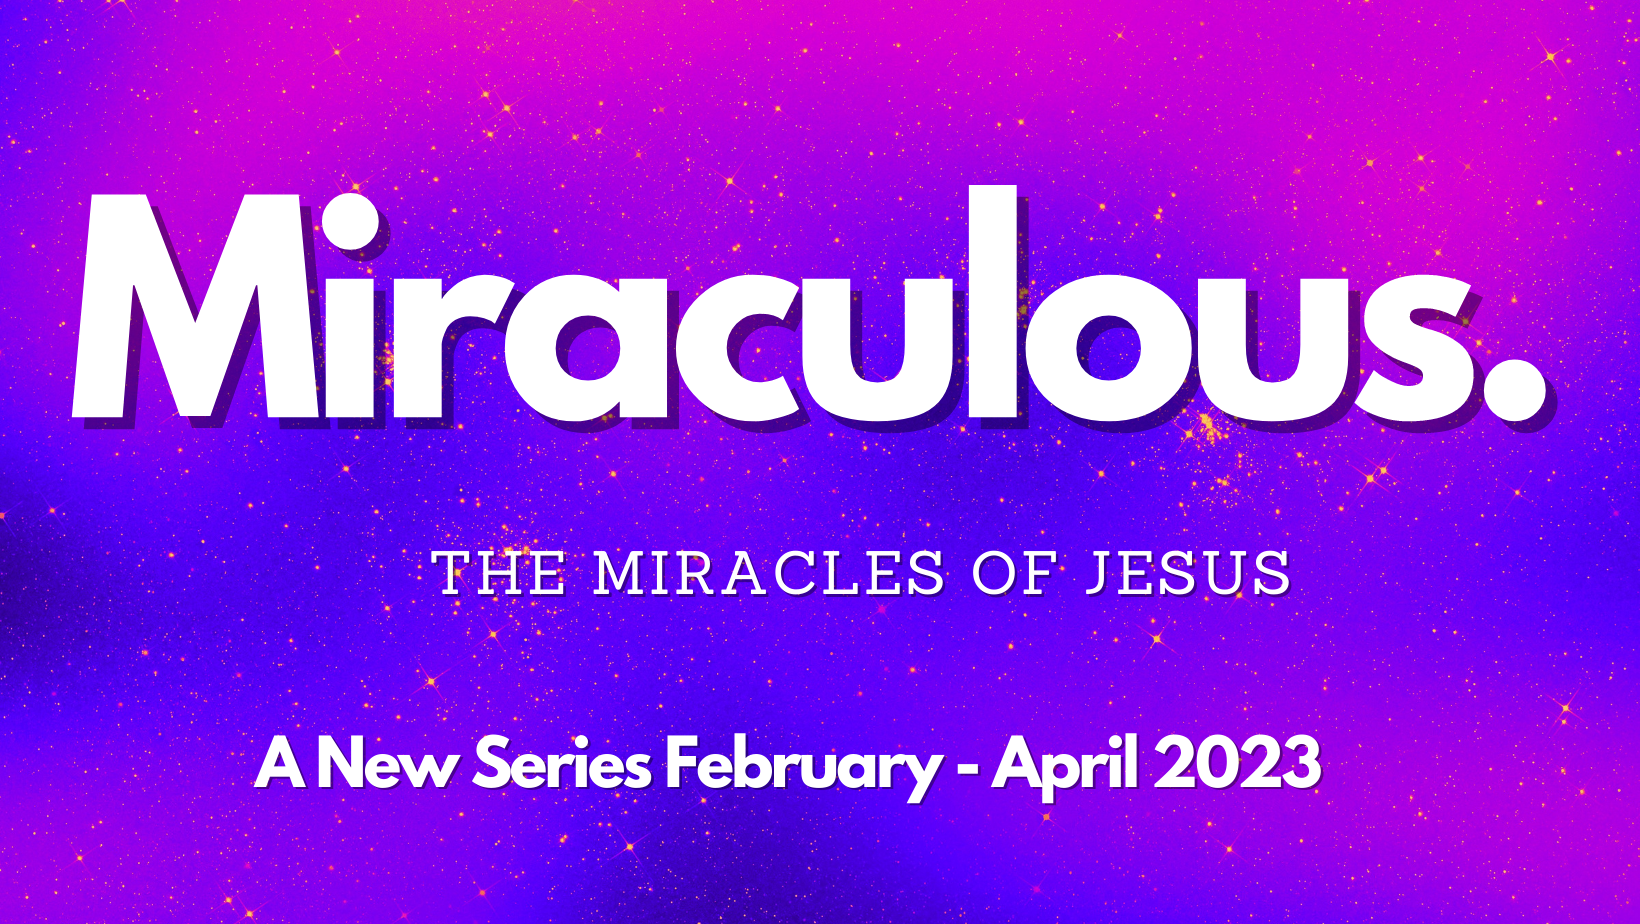 Miraculous – Out of the ordinary can spring the miraculous